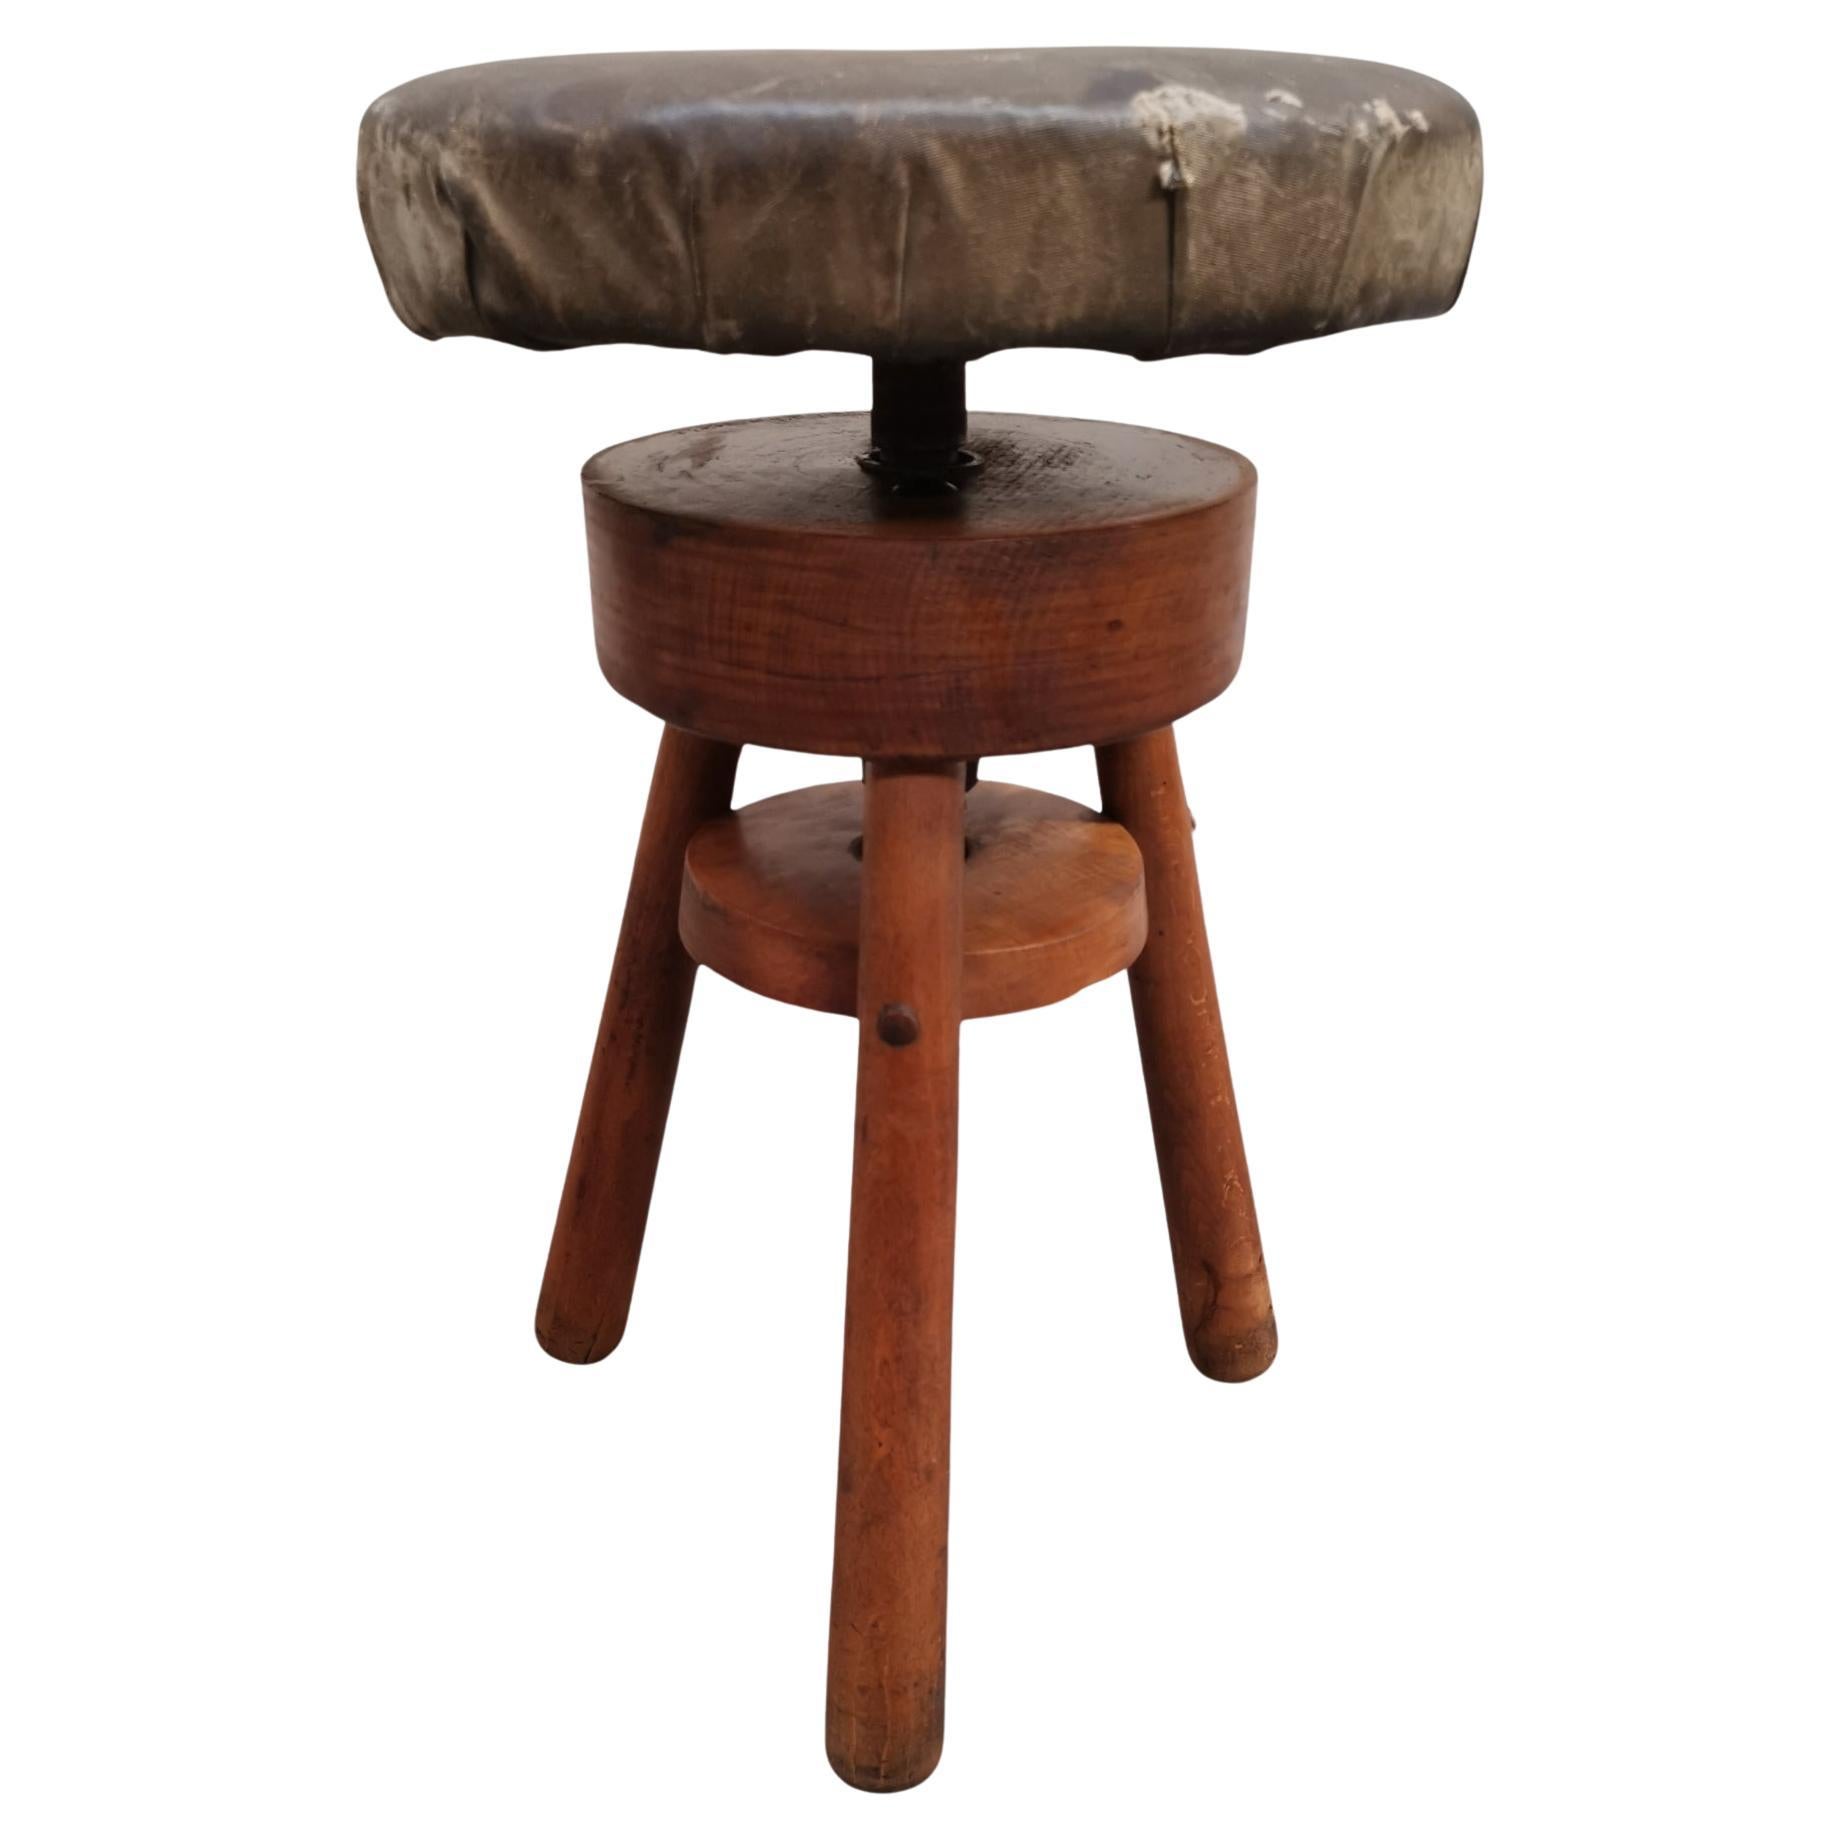 Antique Solid work stool, adjustable height